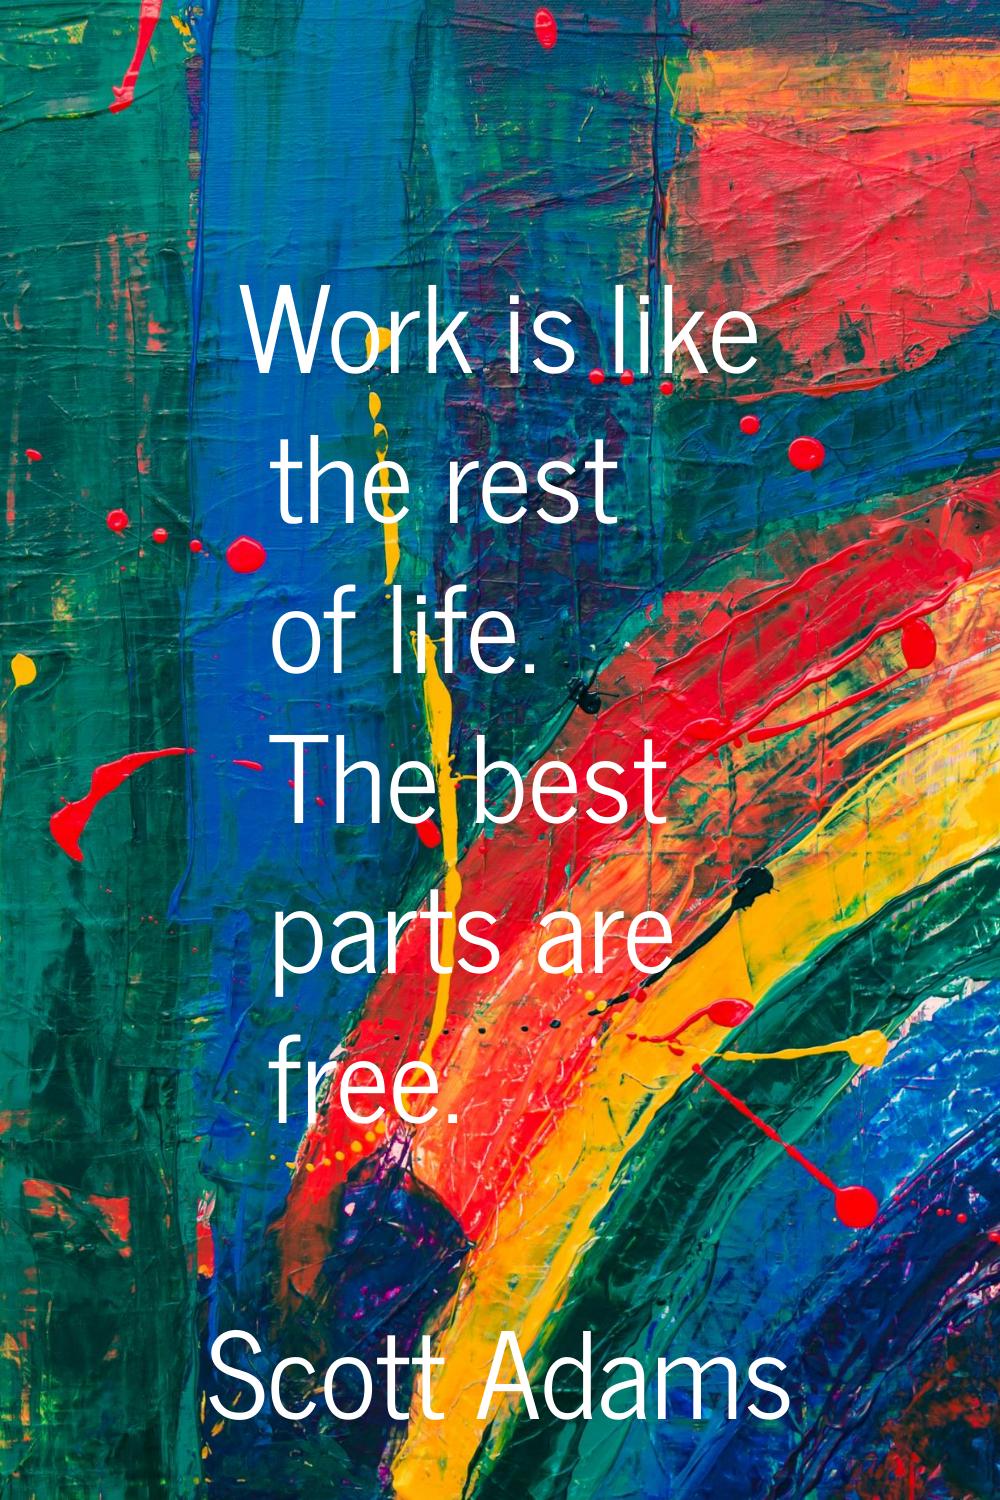 Work is like the rest of life. The best parts are free.